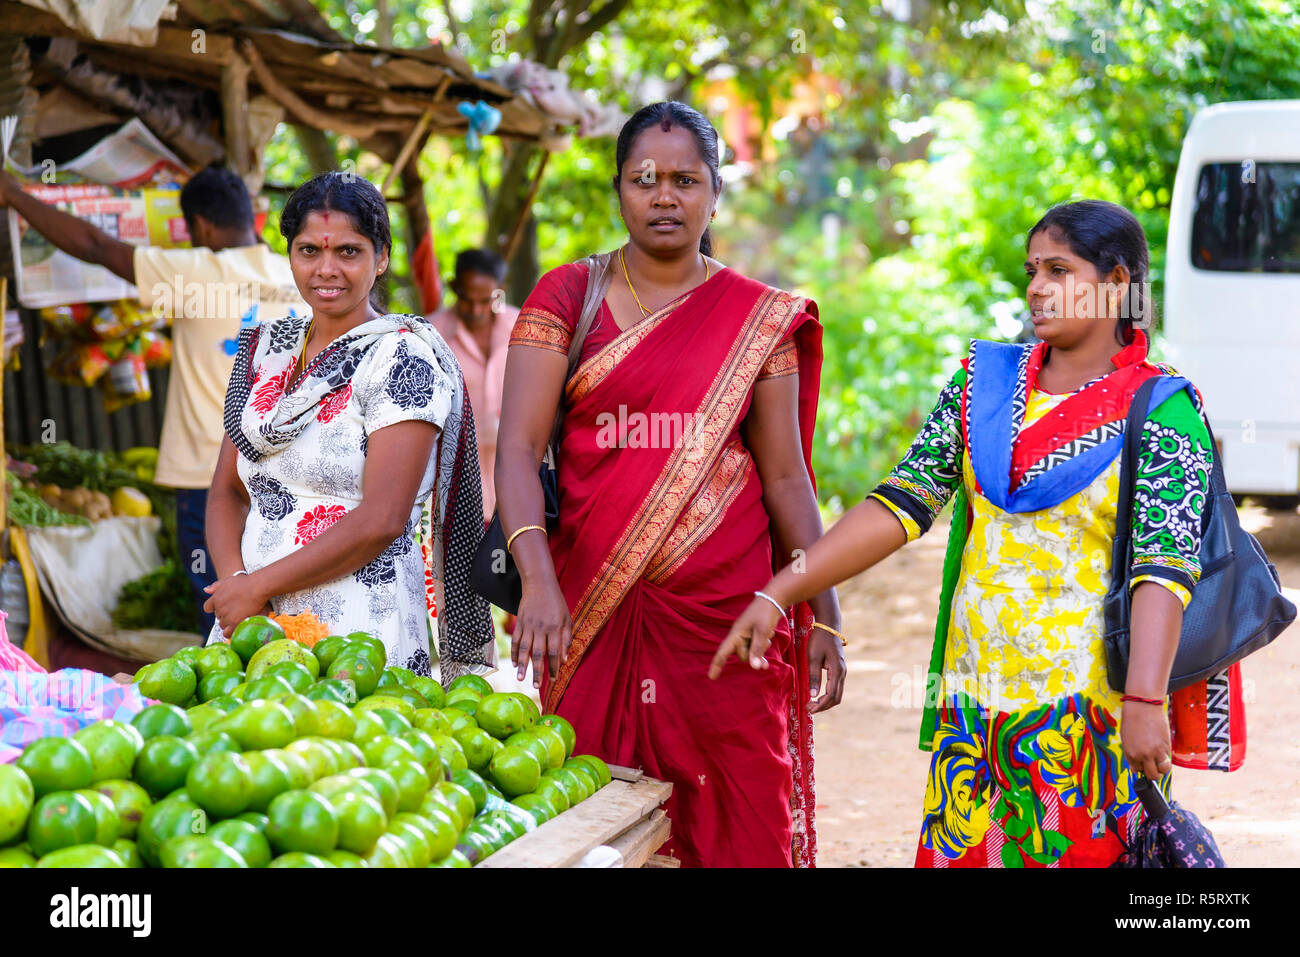 Divithotawela, Sri Lanka - August 20, 2017: Three unidentified women in  traditional clothes are shopping at the local market Stock Photo - Alamy